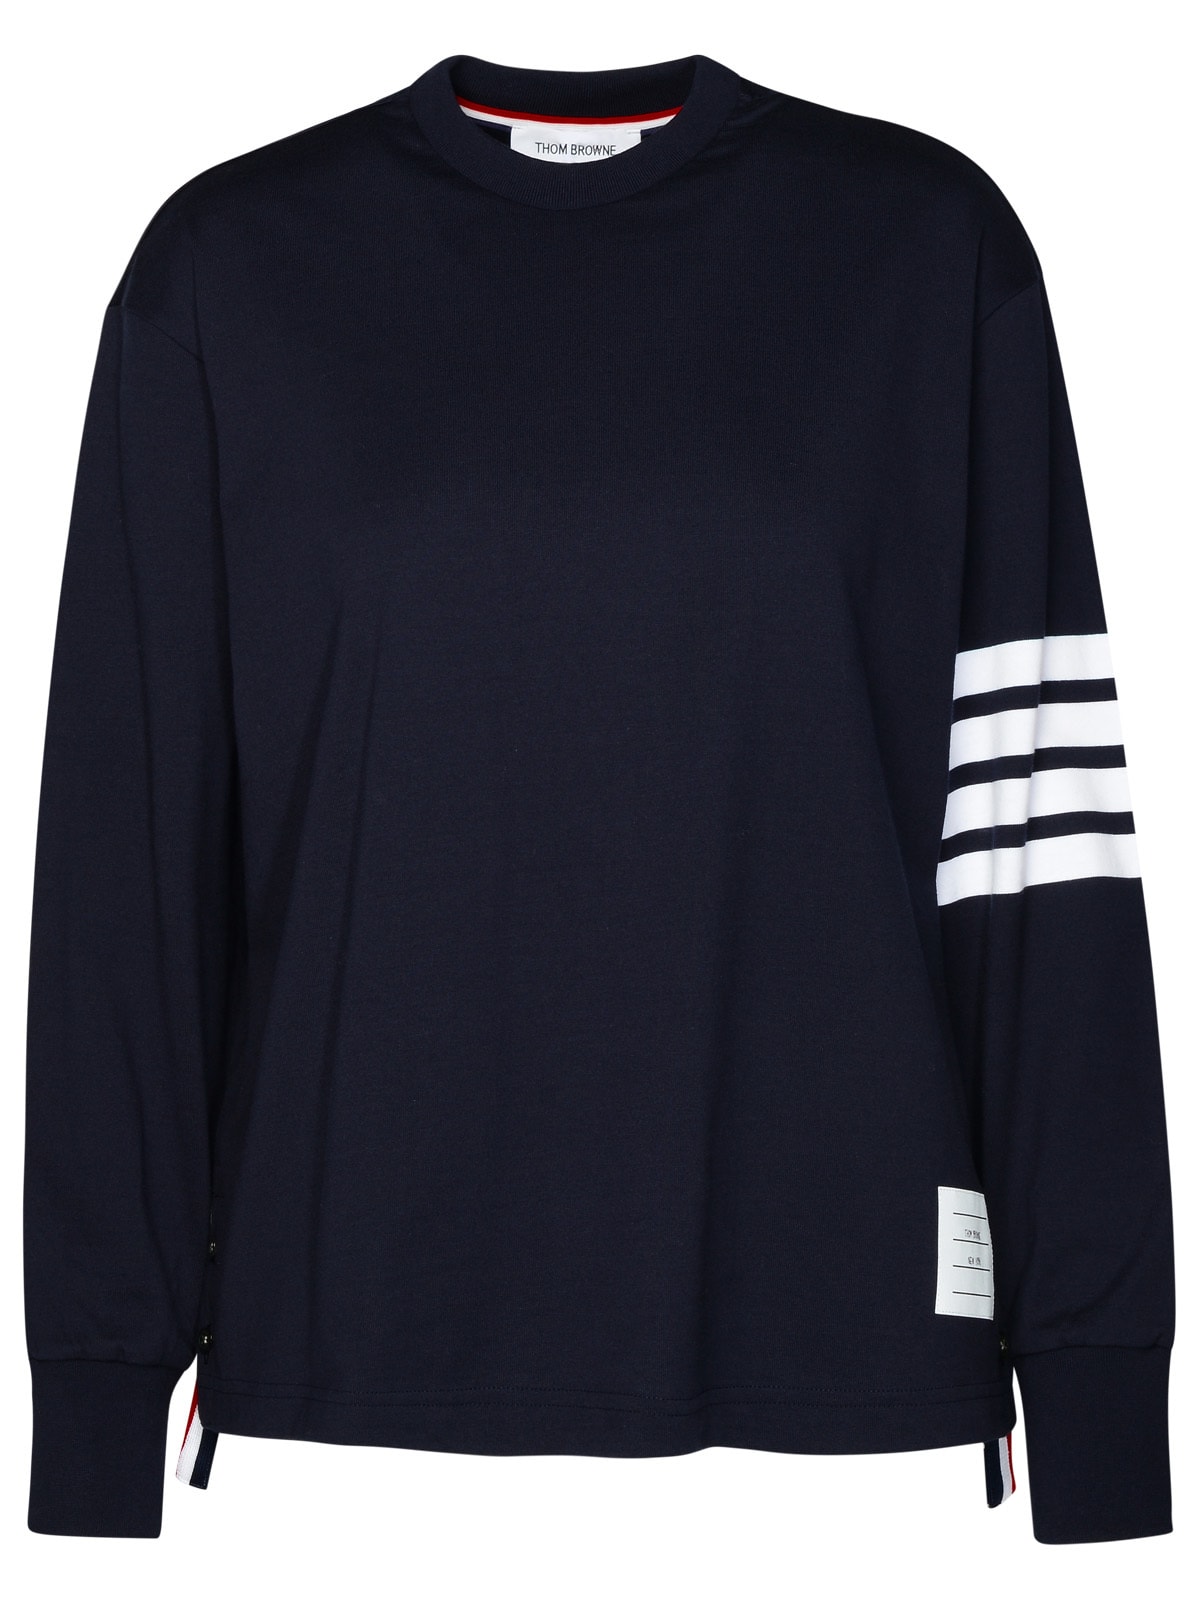 Shop Thom Browne Navy Cotton Sweater